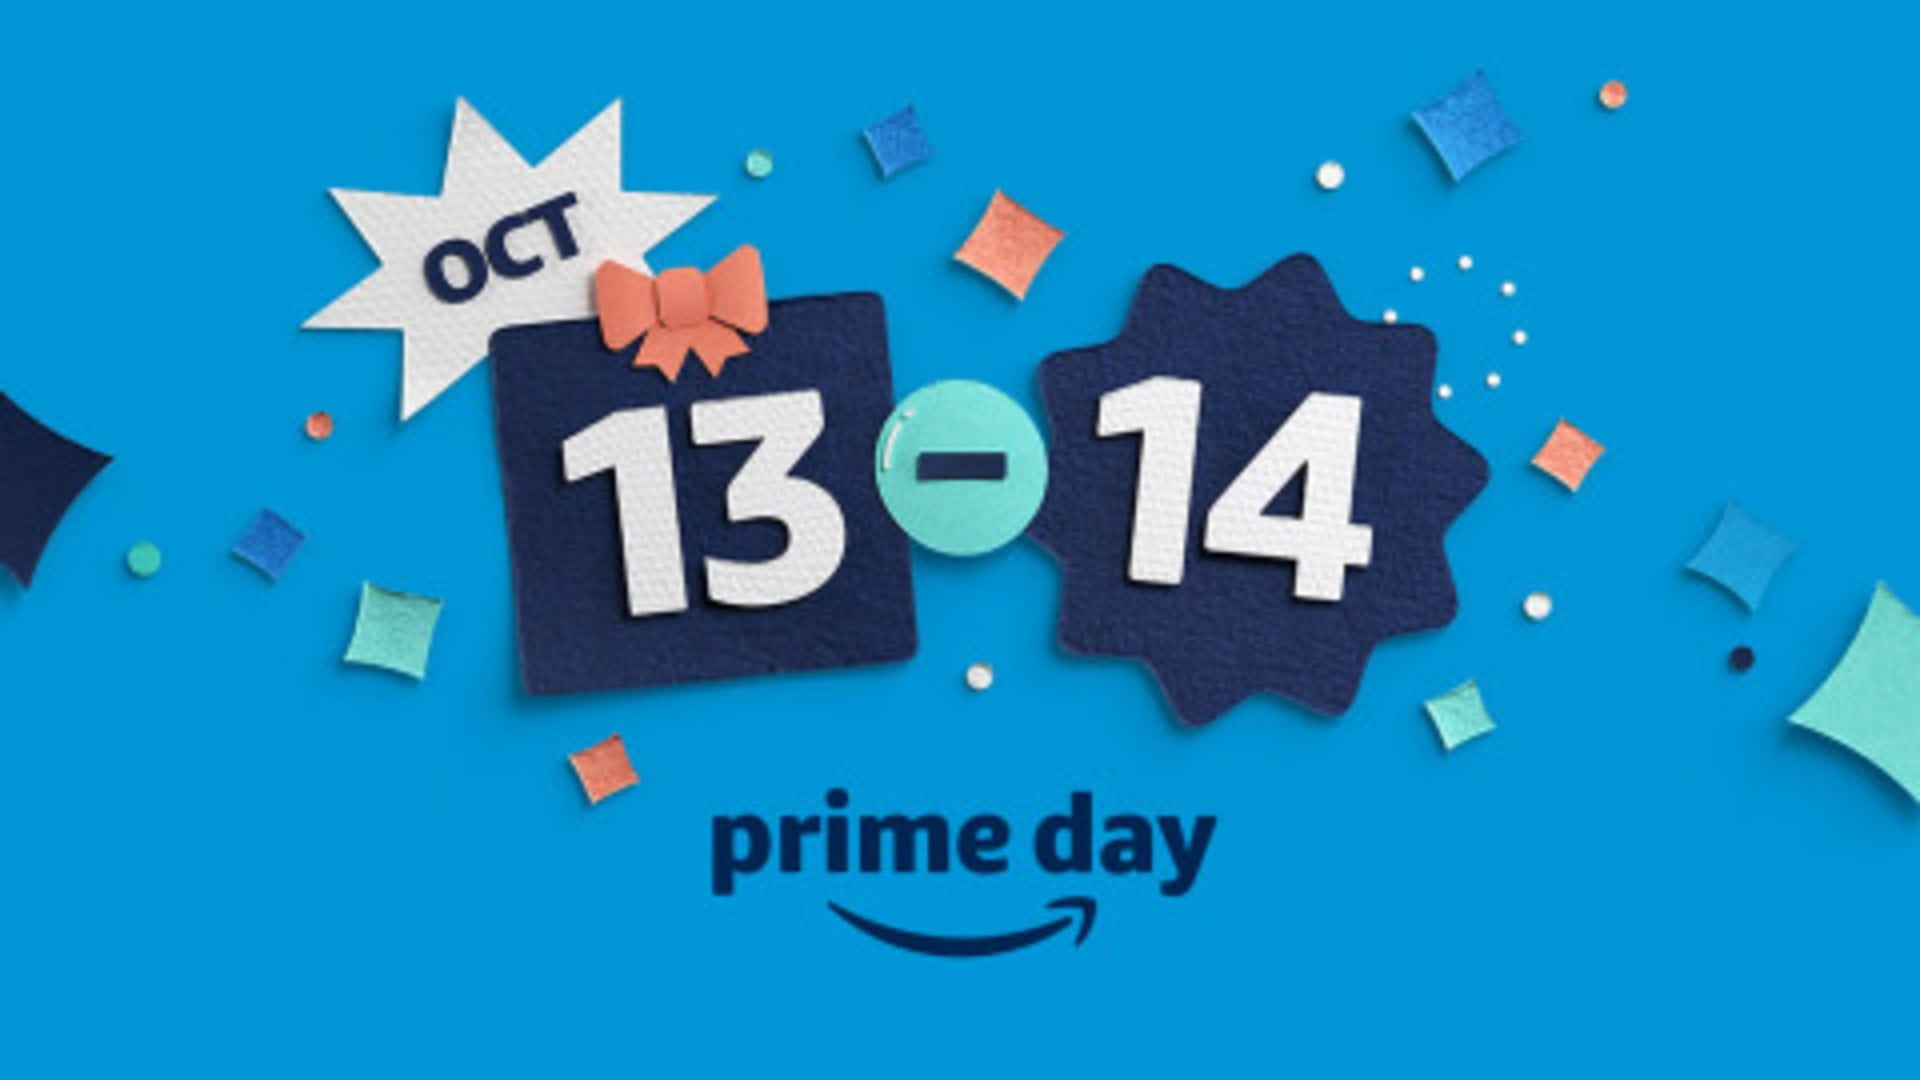 Amazon has officially announced its Prime Day 2020 sale event.